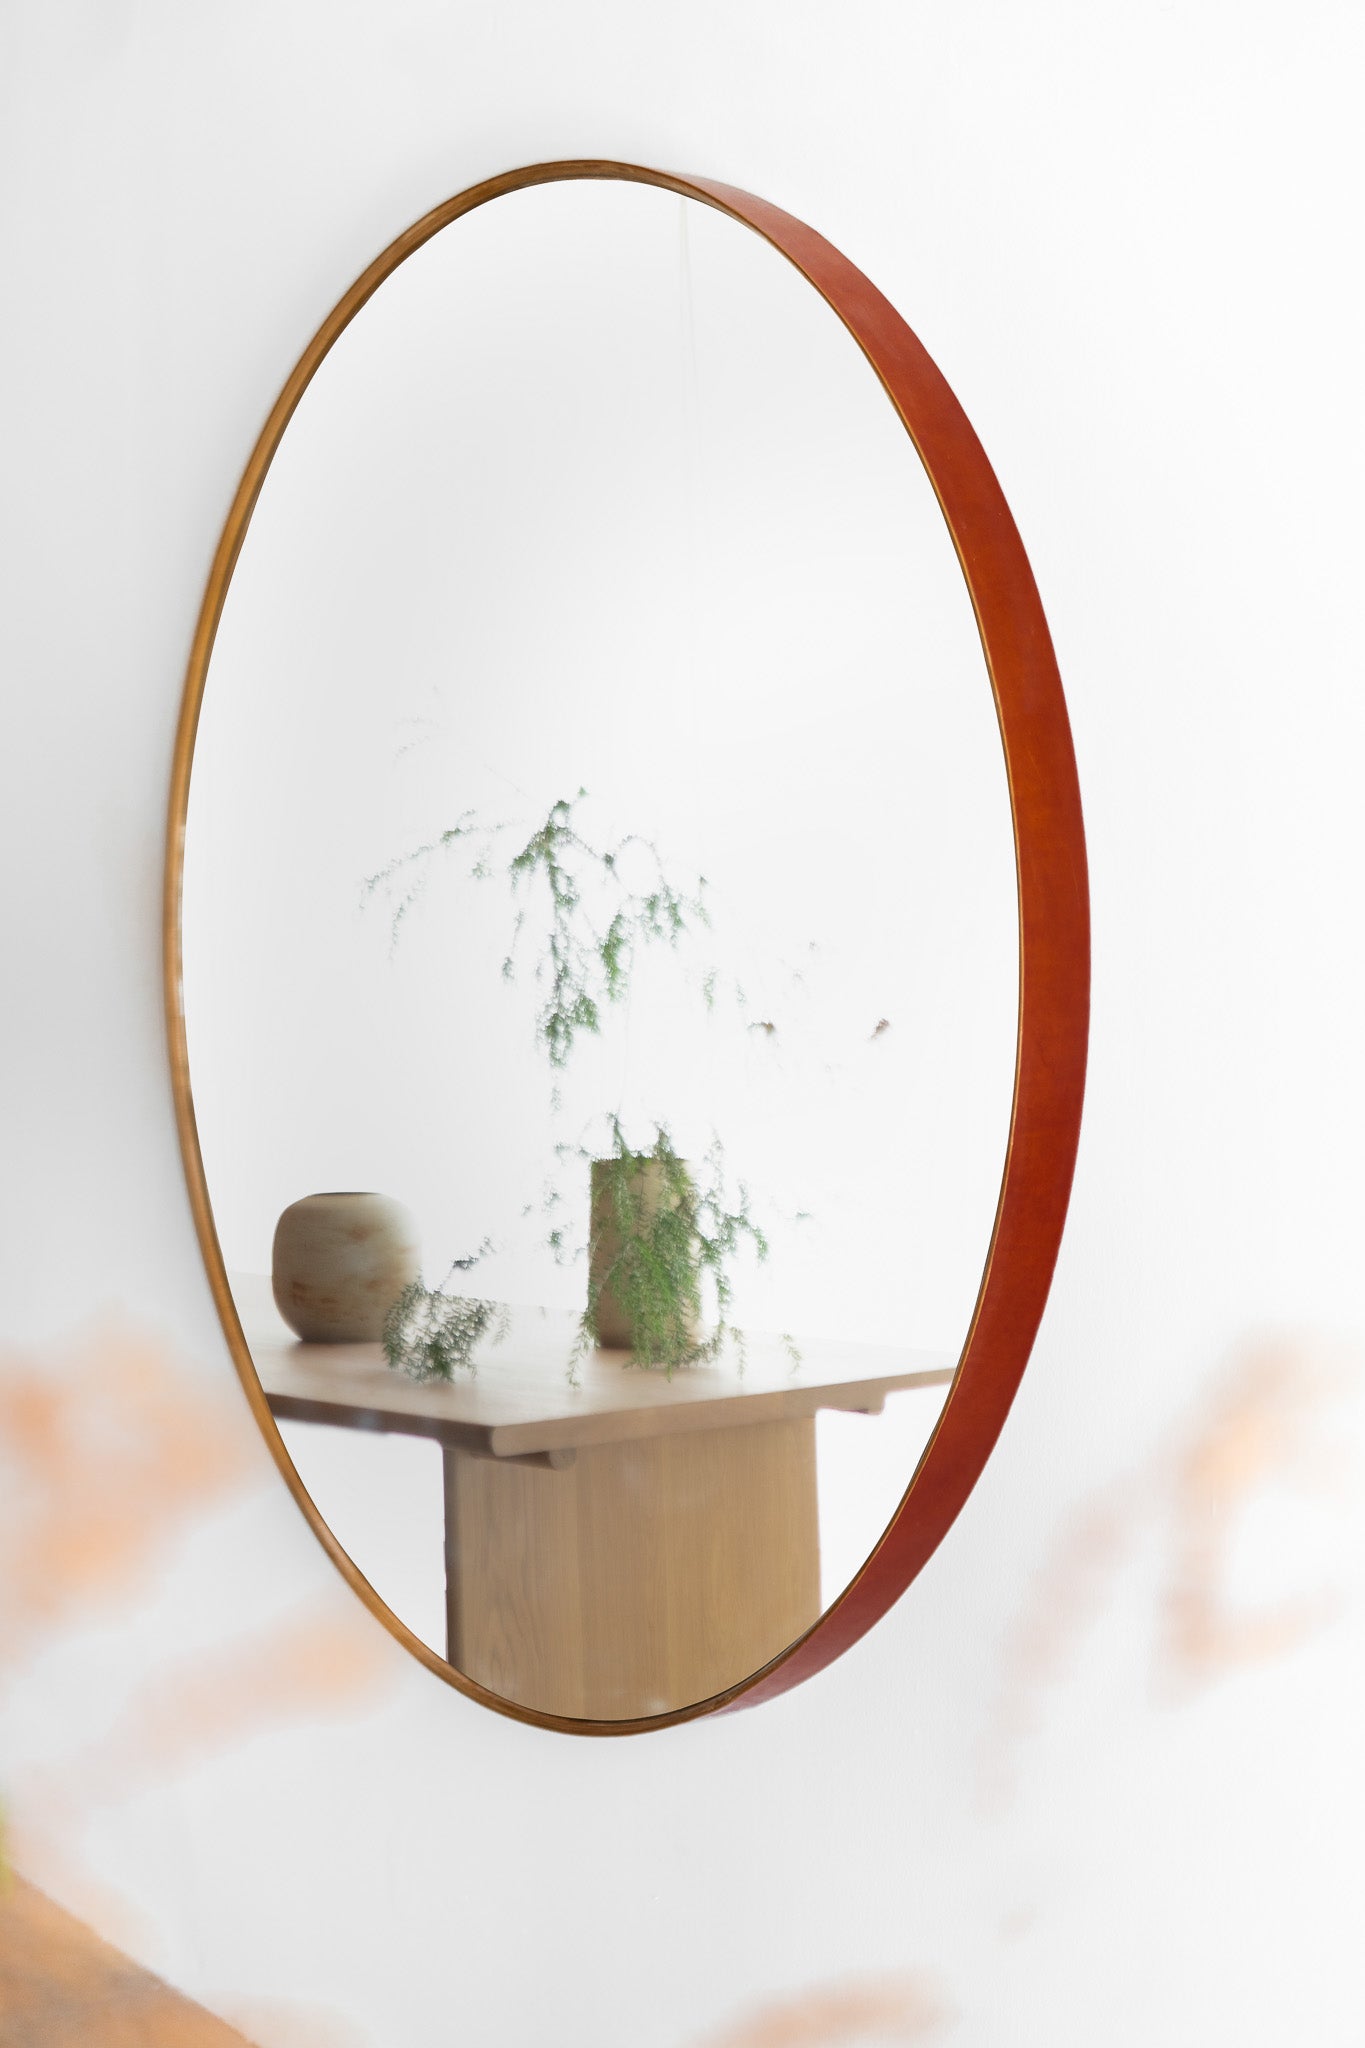 Reyes round mirror - wood mirror wrapped with tanned leather